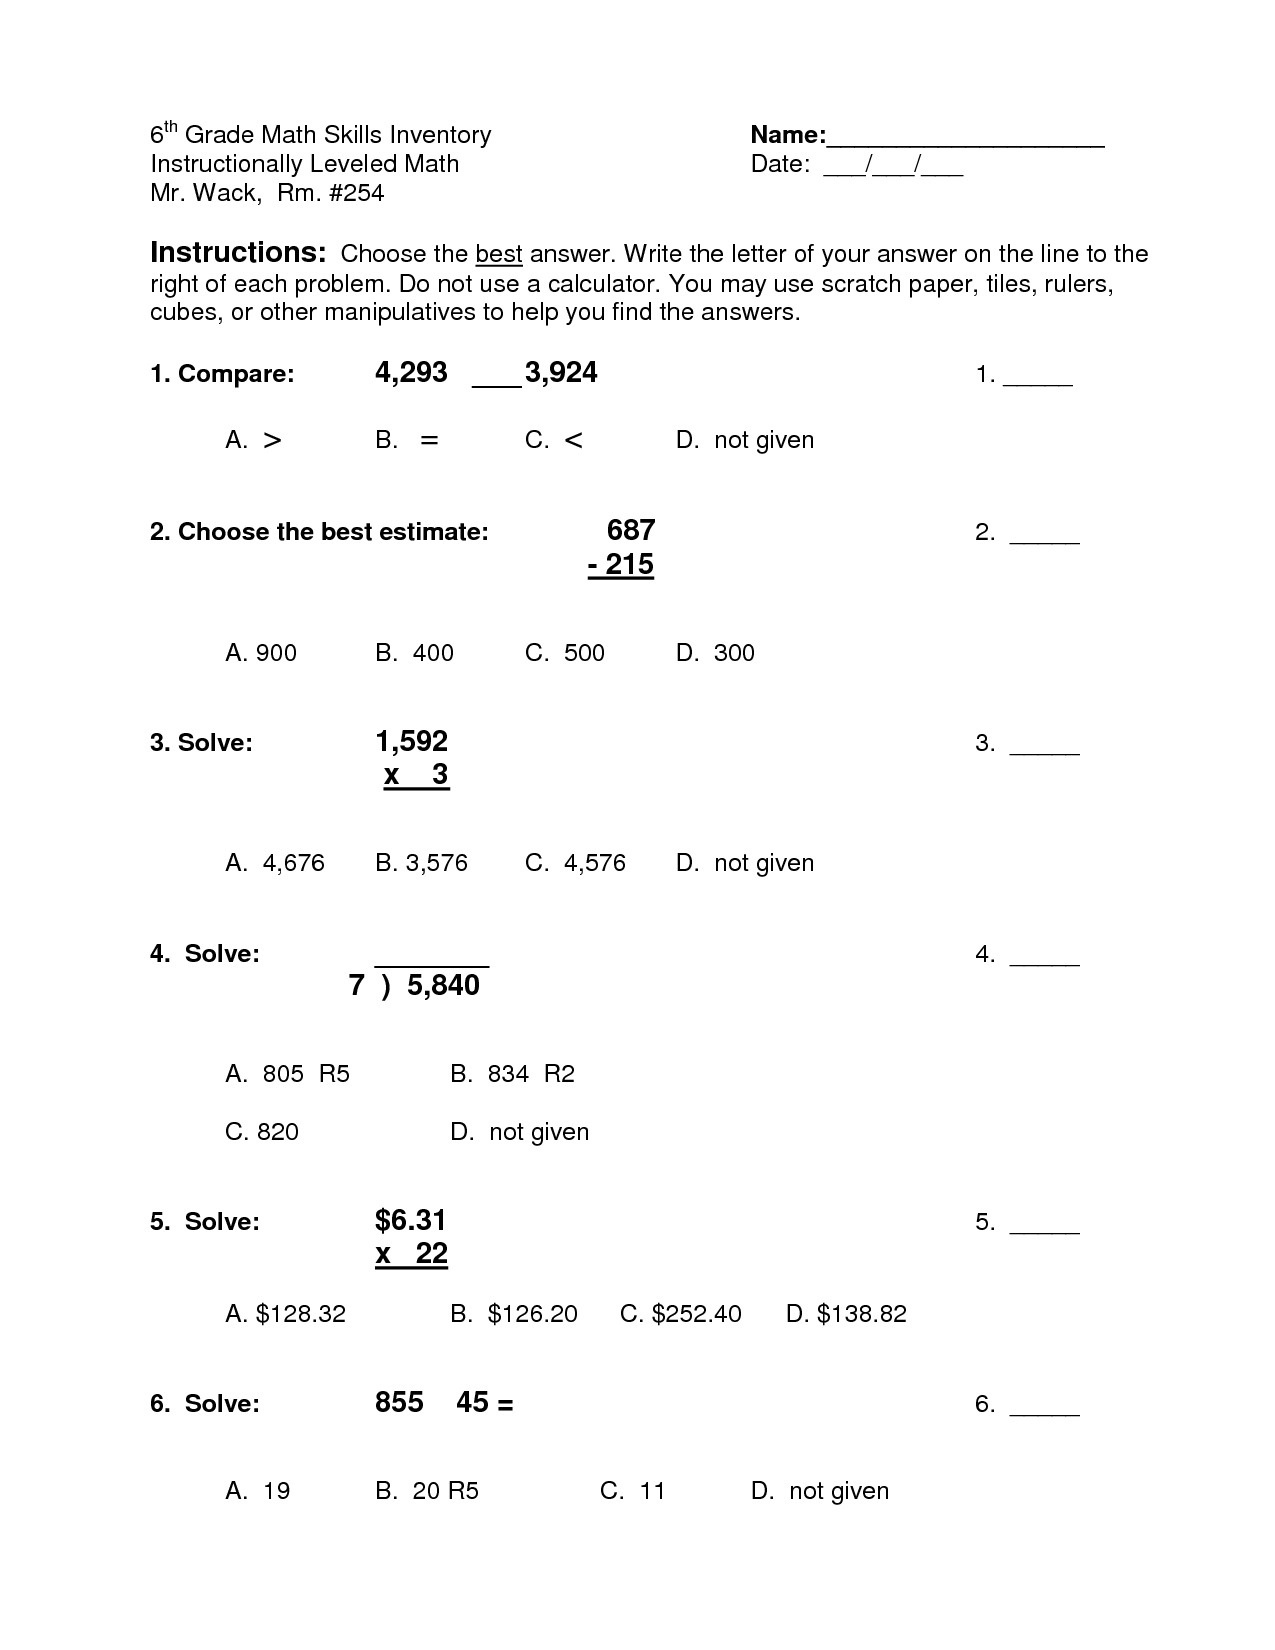 13 Best Images of 6th Grade Math Equations Worksheets  7th Grade Math Algebra Equations 